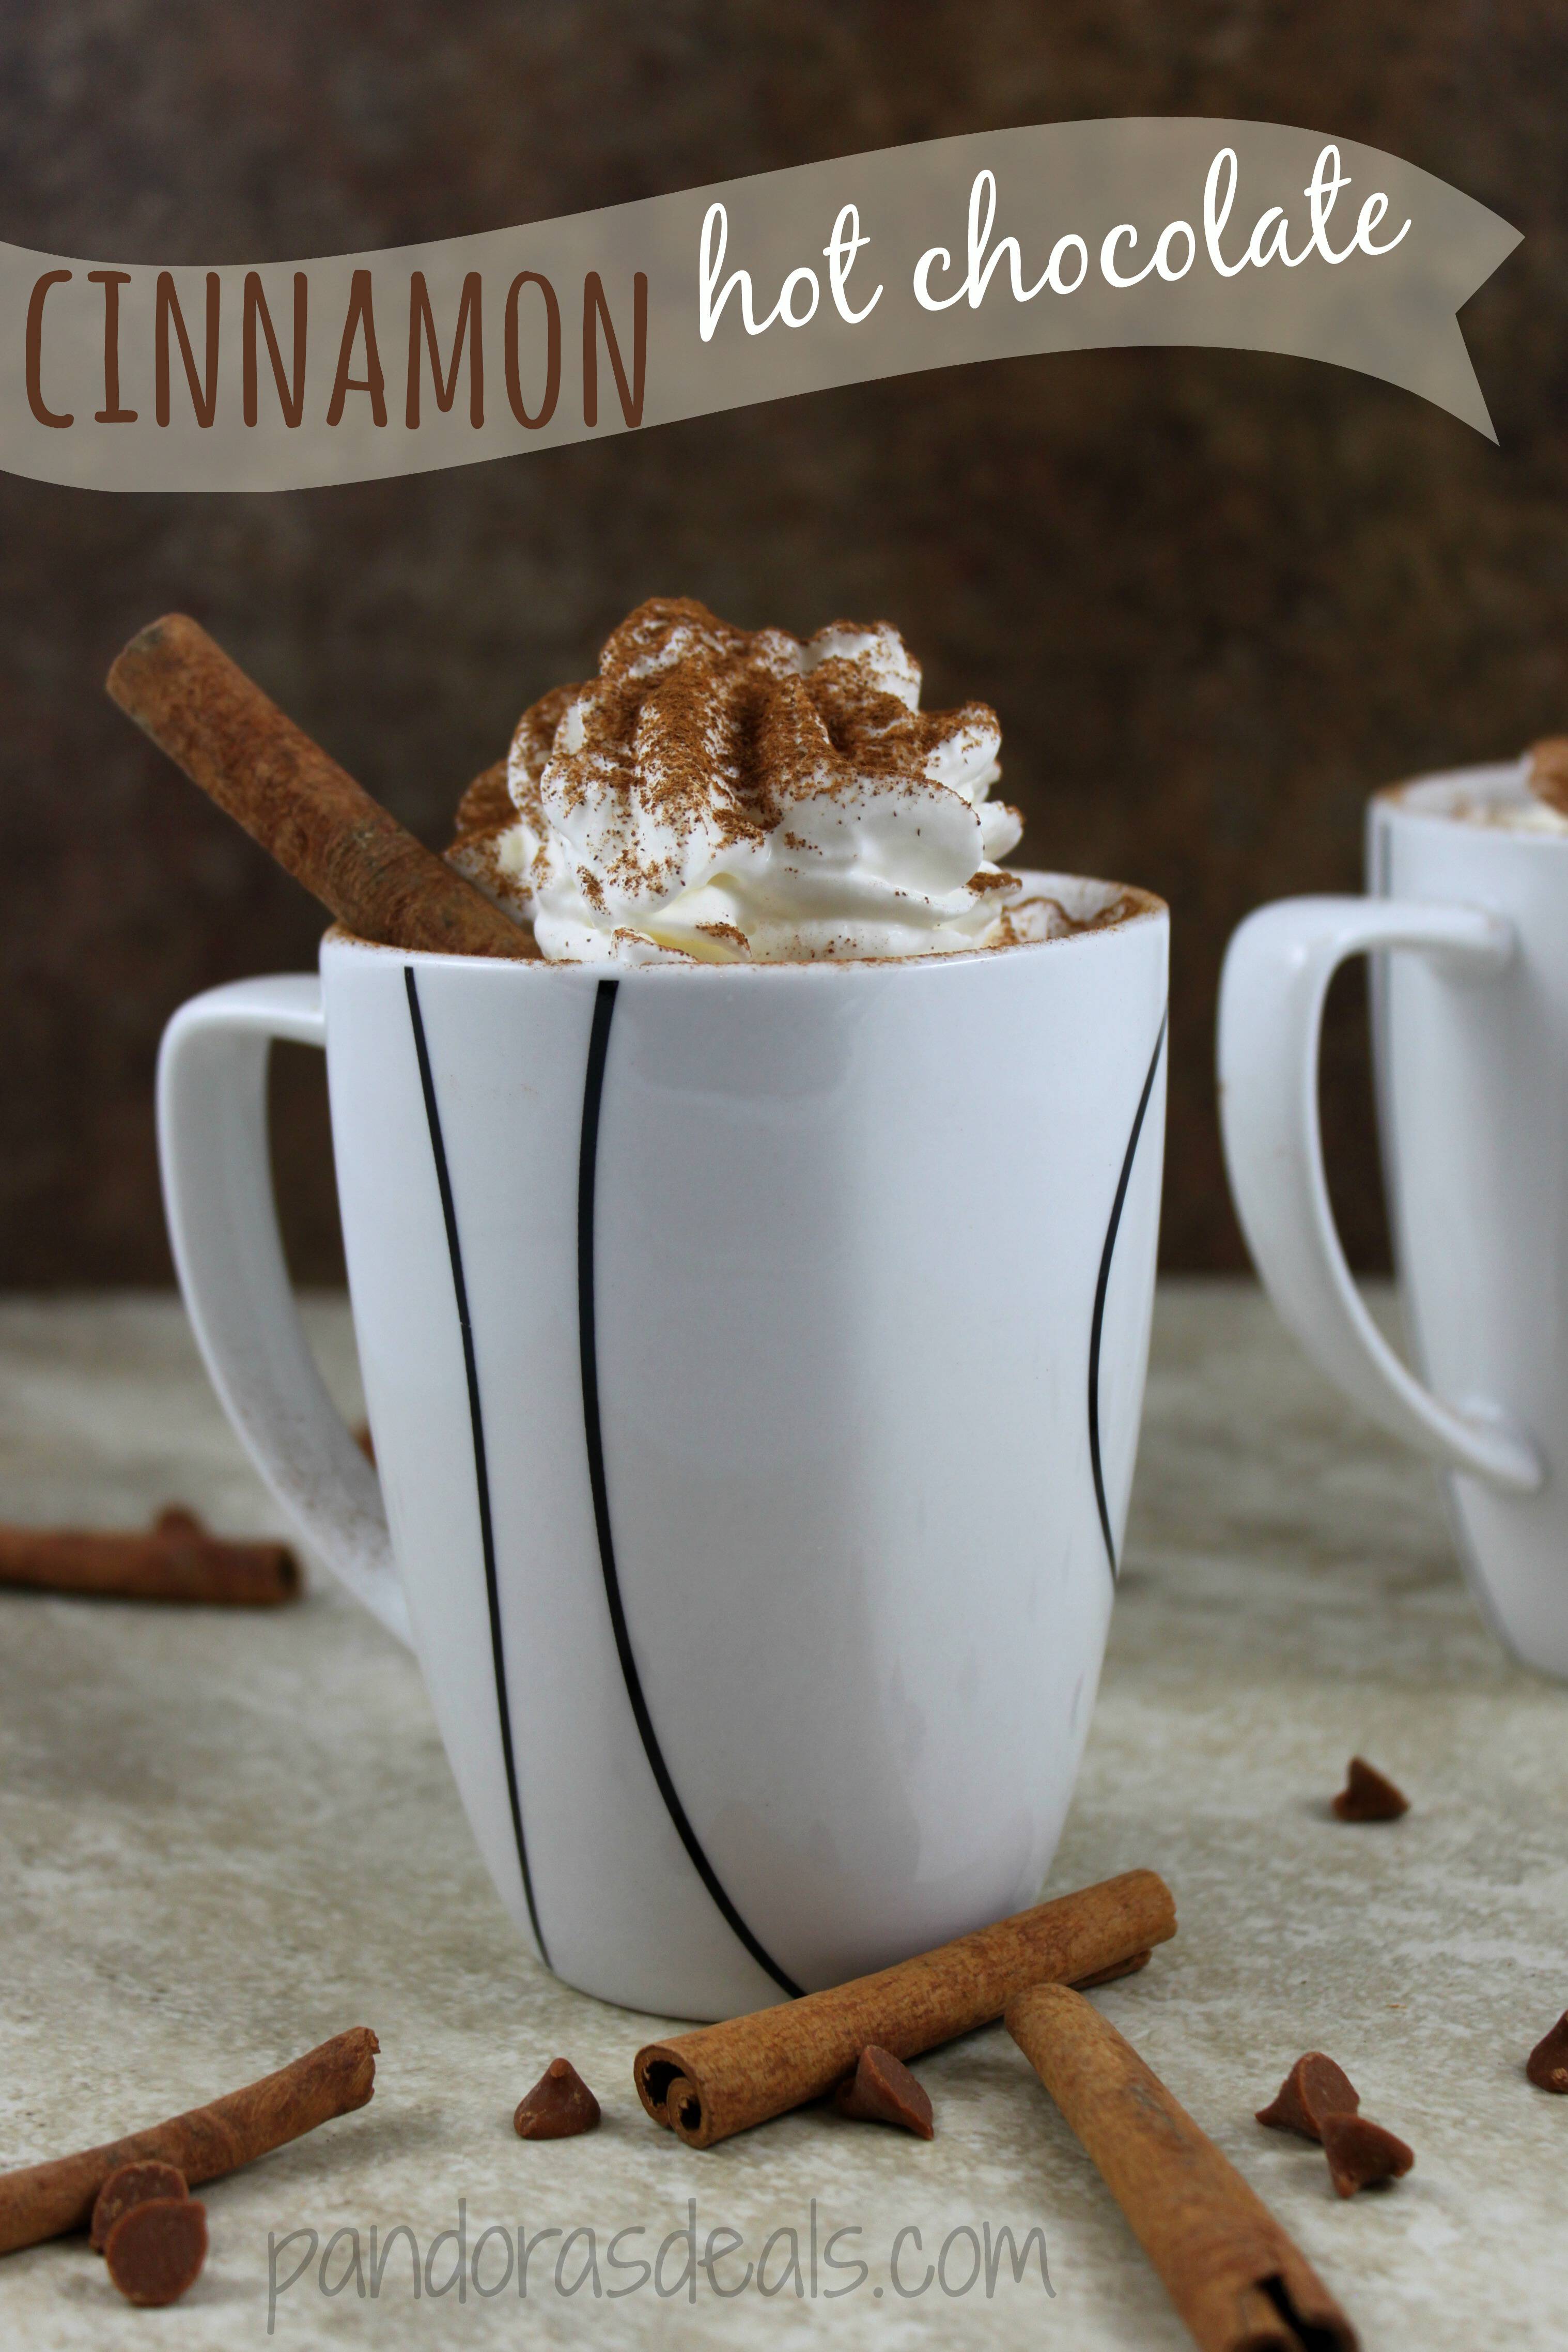 This Cinnamon Hot Chocolate Recipe is really simple to make and soooo sweet and yummy! It's perfect for a cold day. My kids slurped it down so fast!